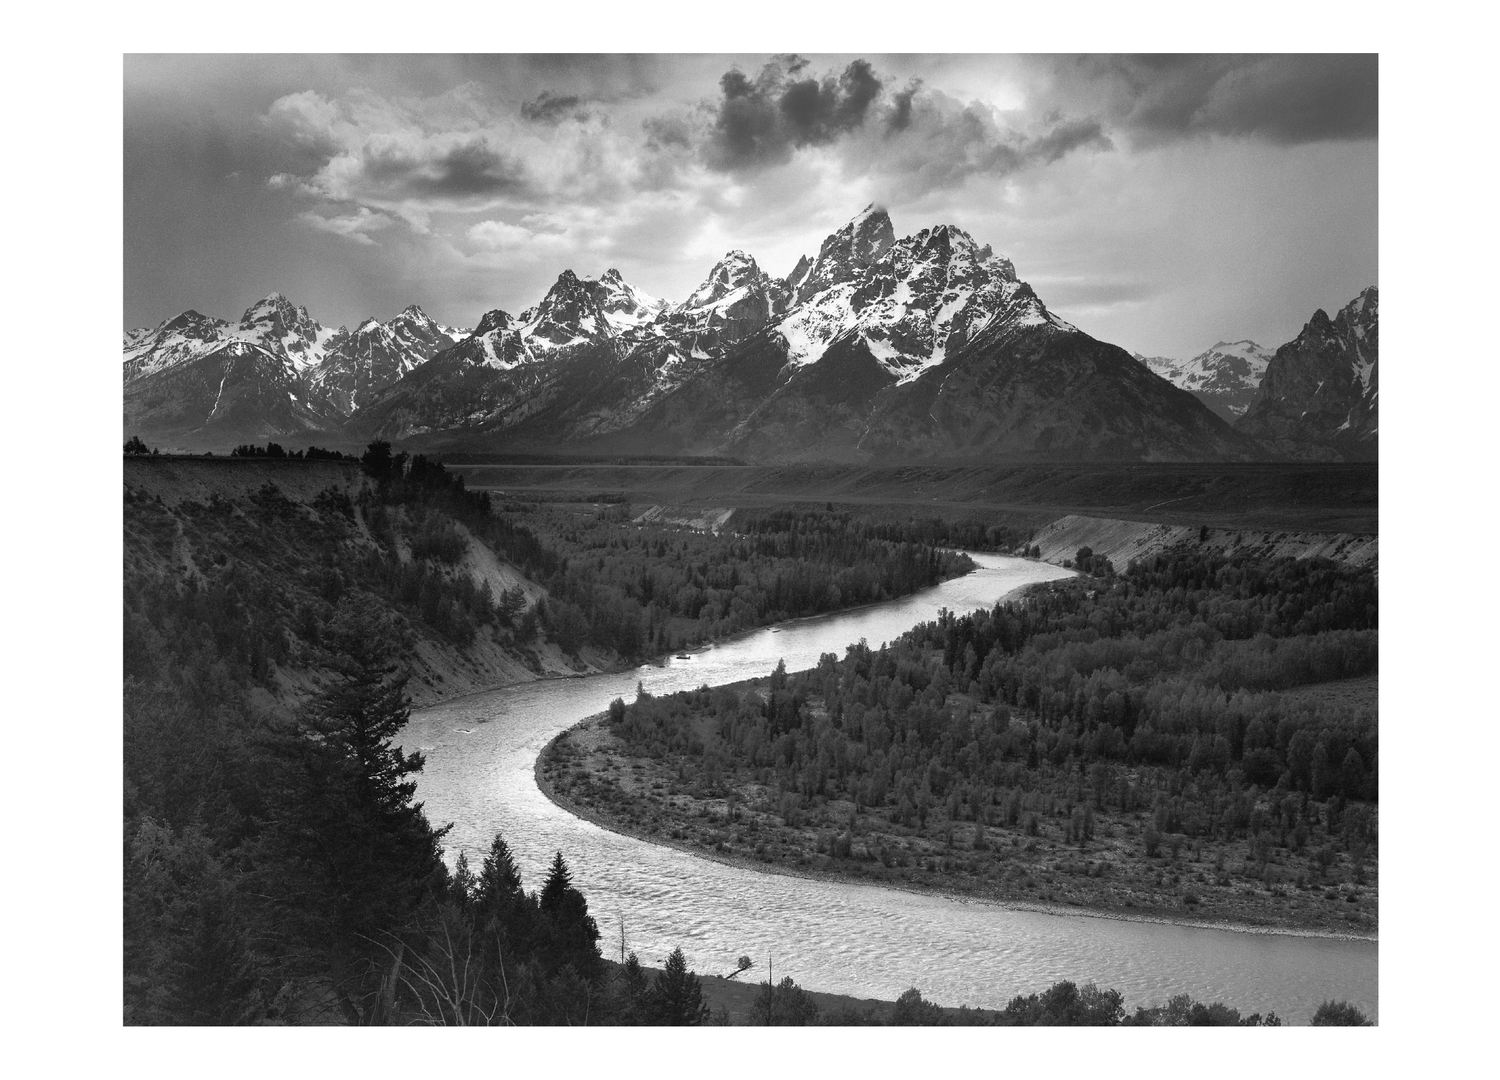 THE TETONS & SNAKE RIVER - ANSEL ADAMS SMALL MATTED REPRODUCTION